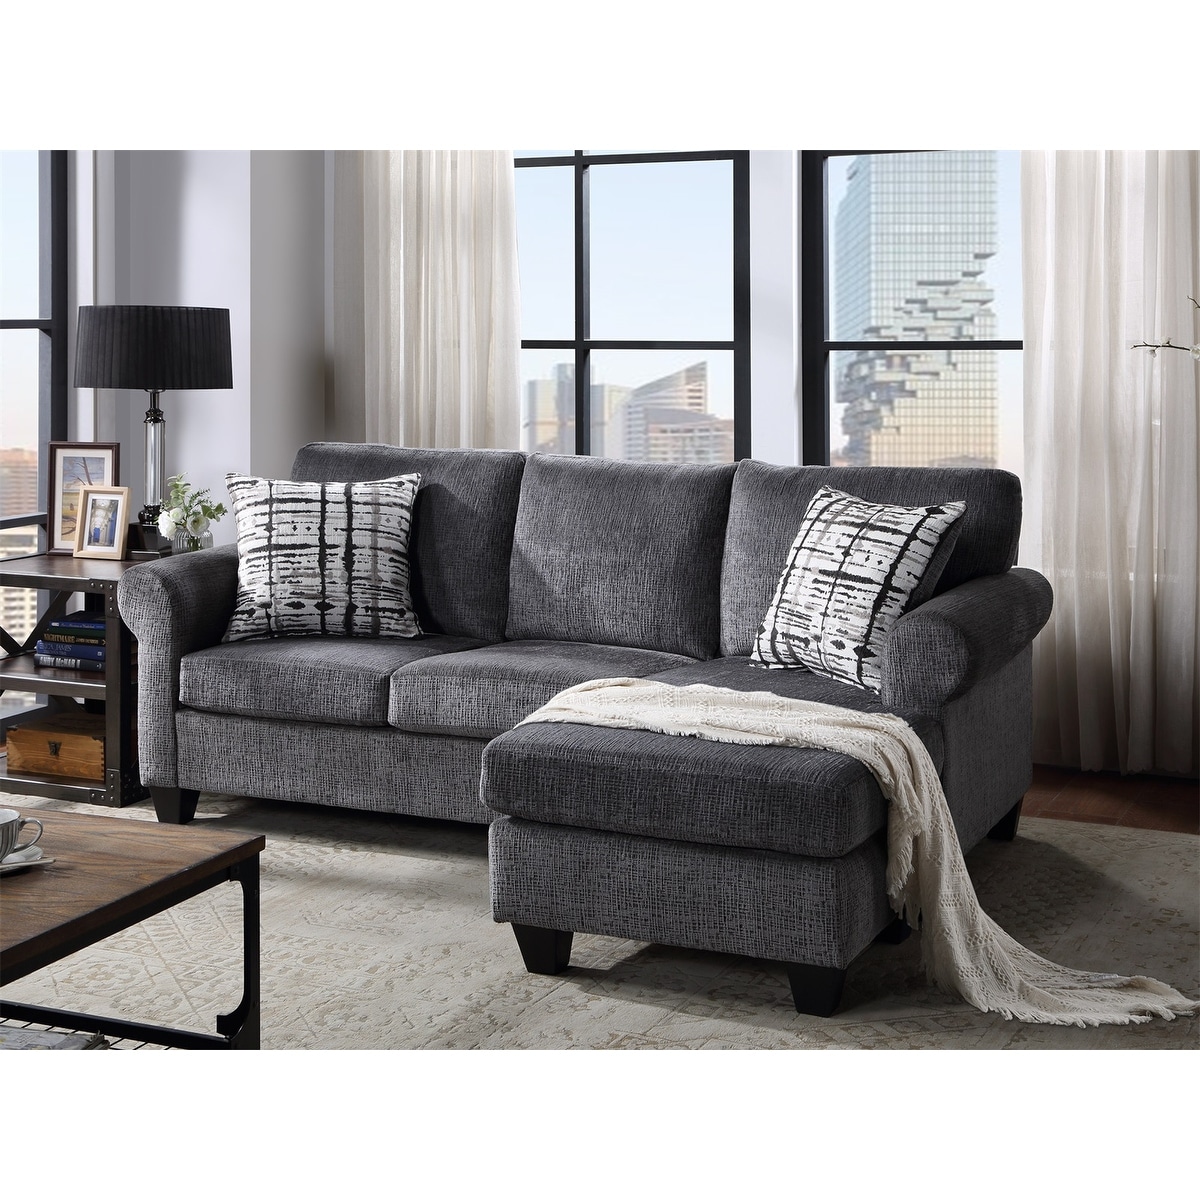 Merax Upholstered Modern Linen Fabric L Shape 3 Seater Convertible Sectional Sofa For Small Space